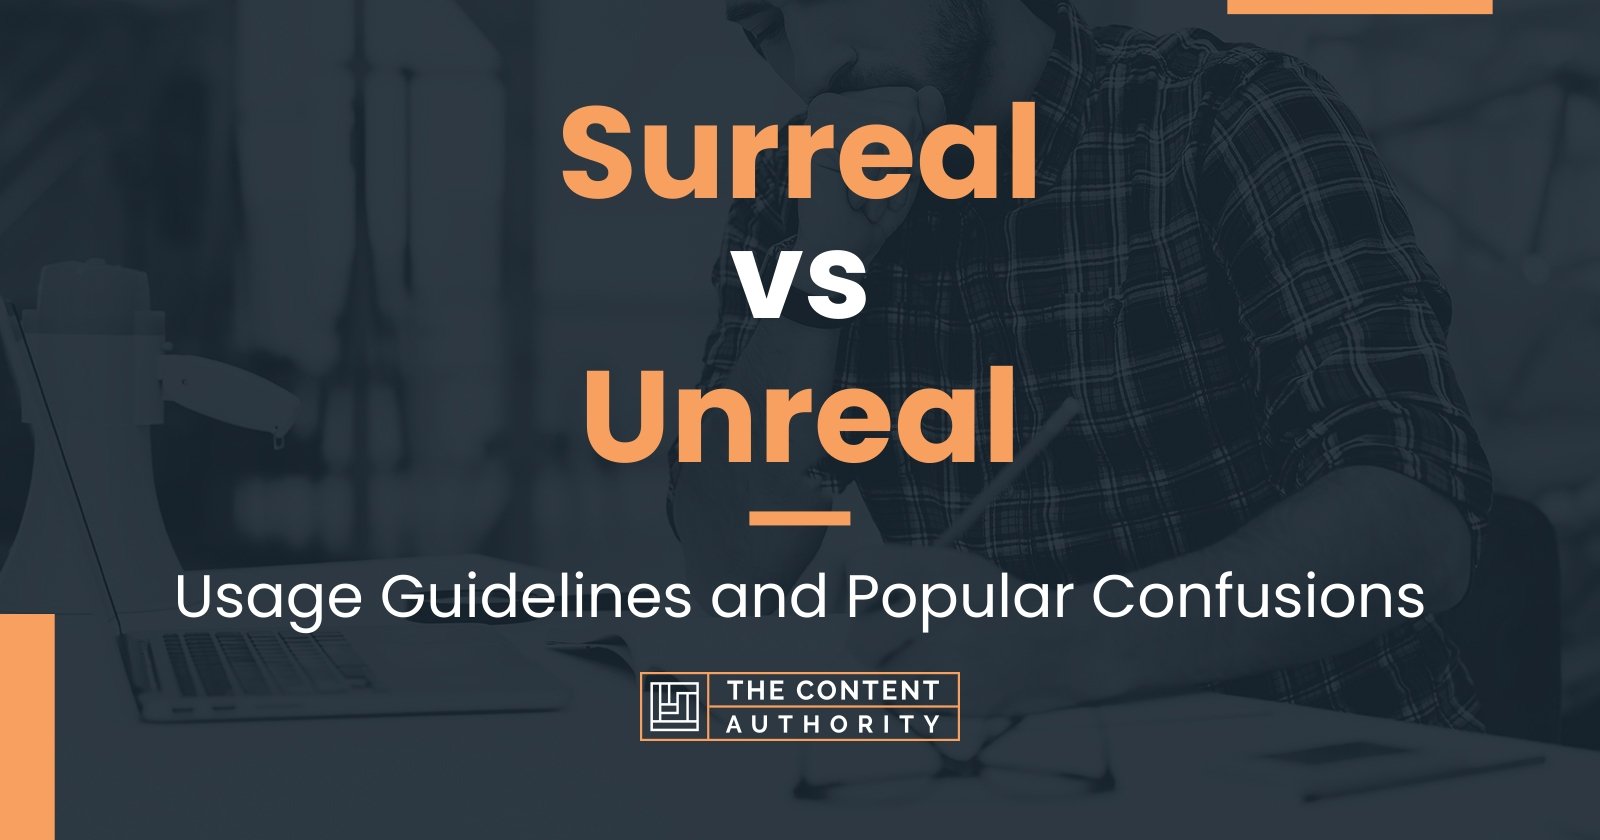 Surreal vs Unreal: Usage Guidelines and Popular Confusions